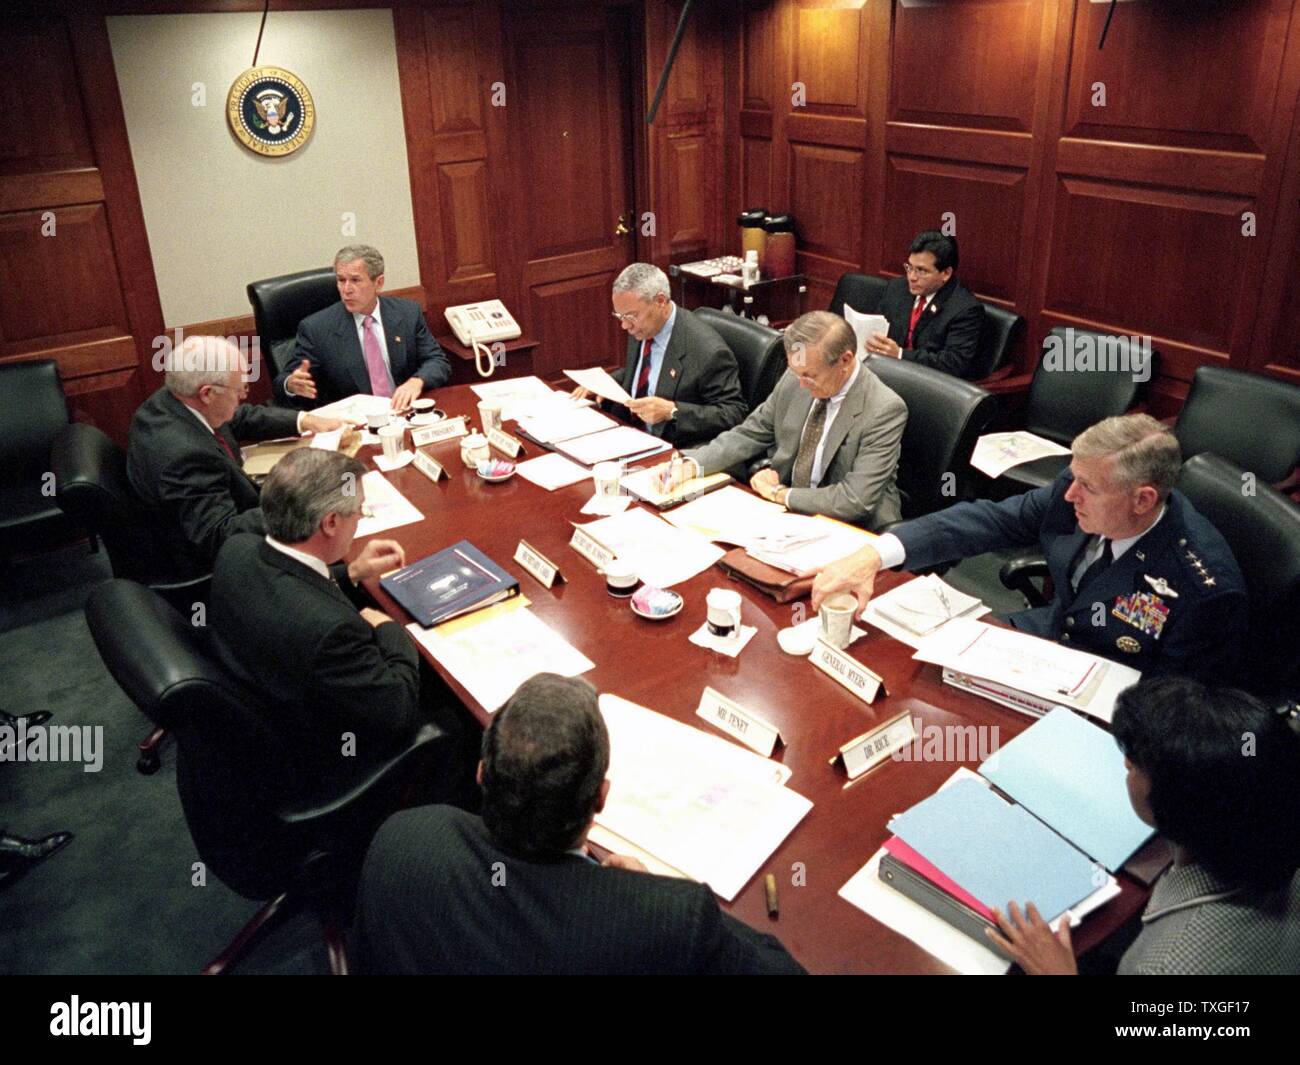 President George W Bush, meets with top security and government officials, in the White House situation Room, during the aftermath days following the September 11th 2001 terrorist attacks, on US Cities (9/11) Stock Photo